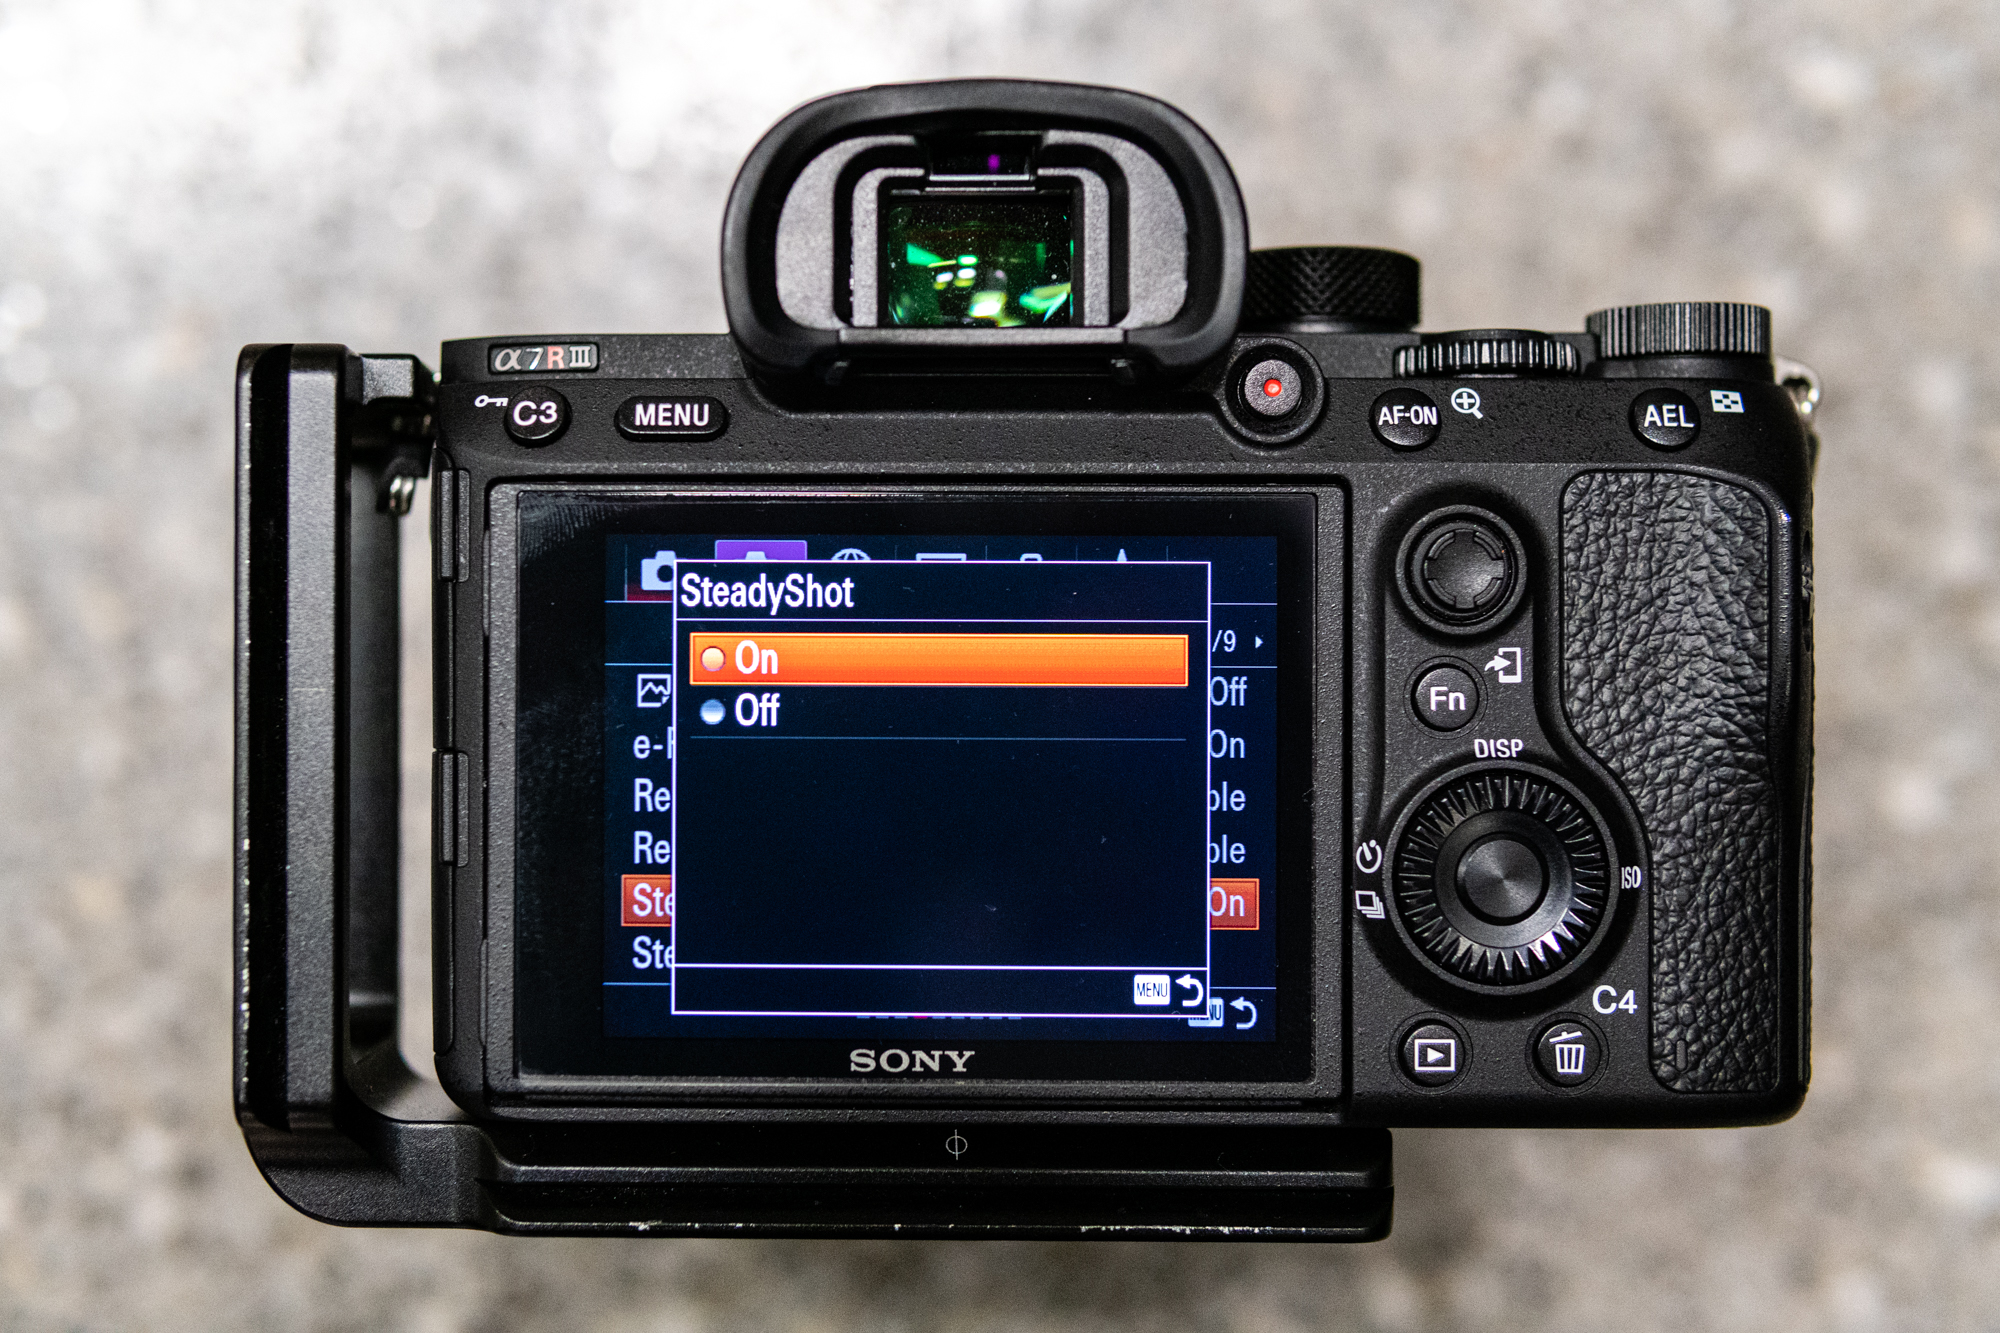 Rear screen of a Sony mirrorless camera with menu showing Steadyshot image stabilization option